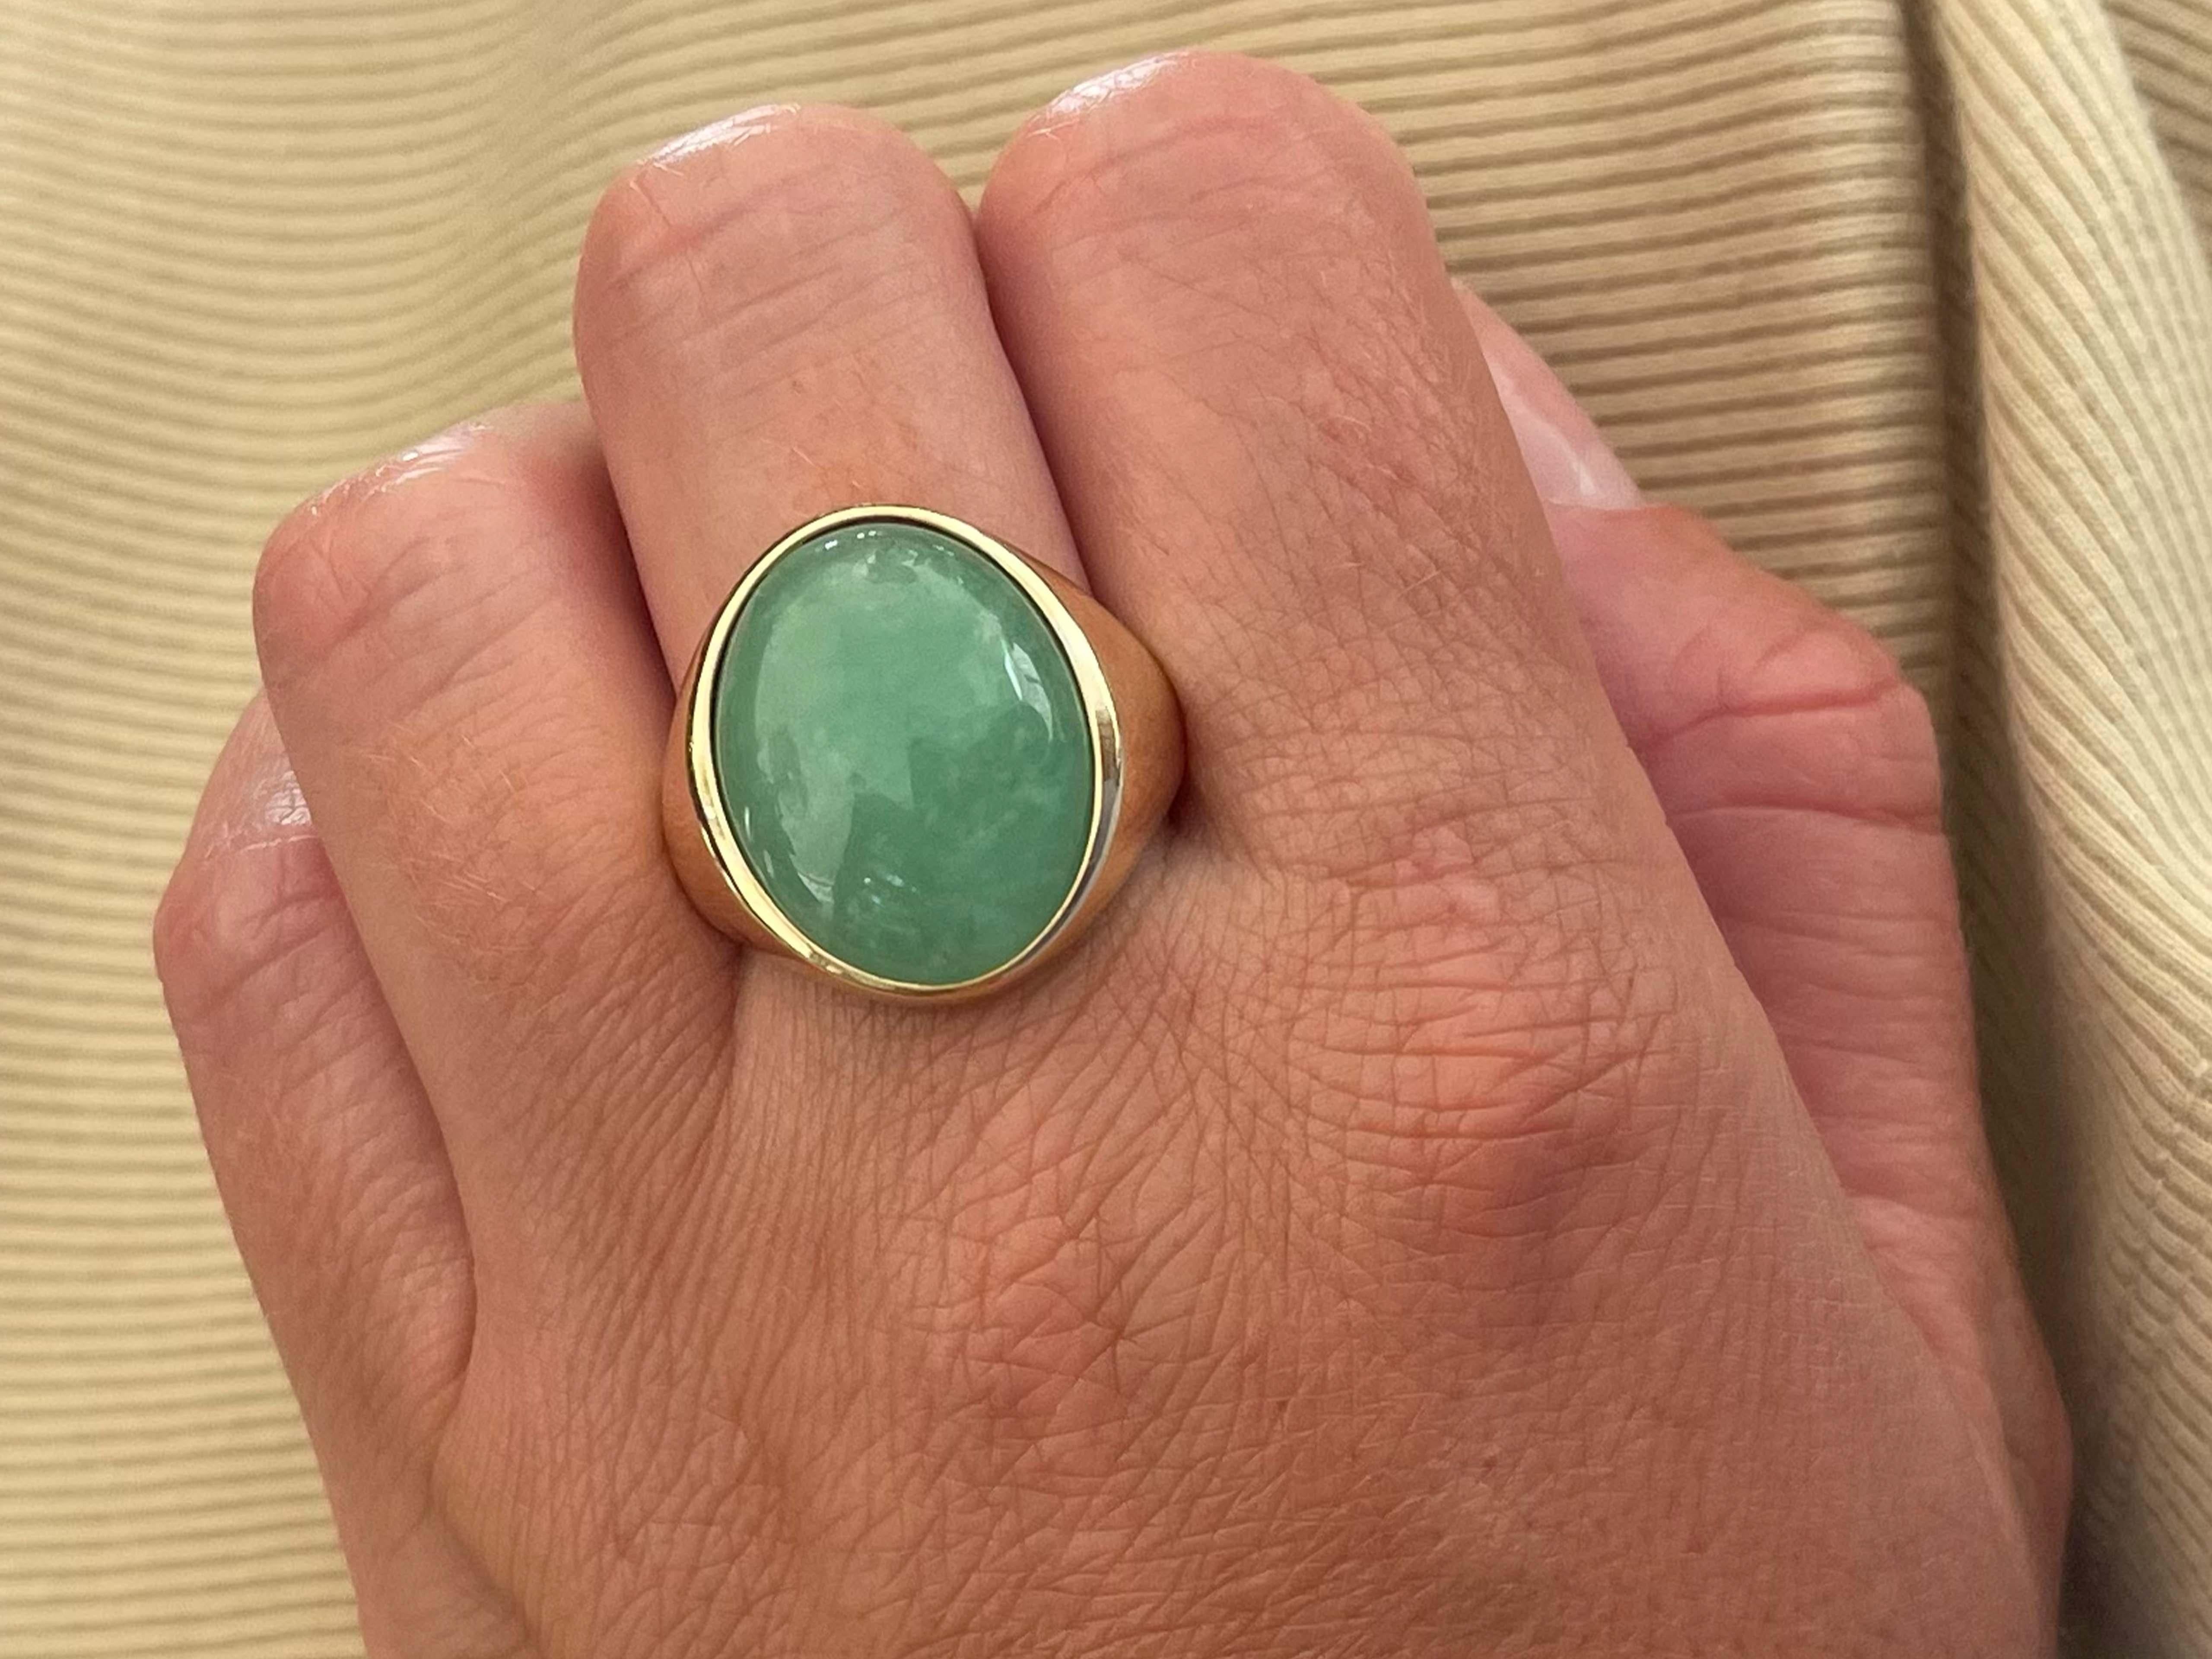 Item Specifications:

Metal: 14k Yellow Gold 

Style: Statement Ring

Ring Size: 10.5 (resizing available for a fee)

Total Weight: 10.6 Grams

Gemstone Specifications:

Center Gemstone: Jadeite Jade

Shape: Oval

Color: Green

Cut: Cabochon

Jade